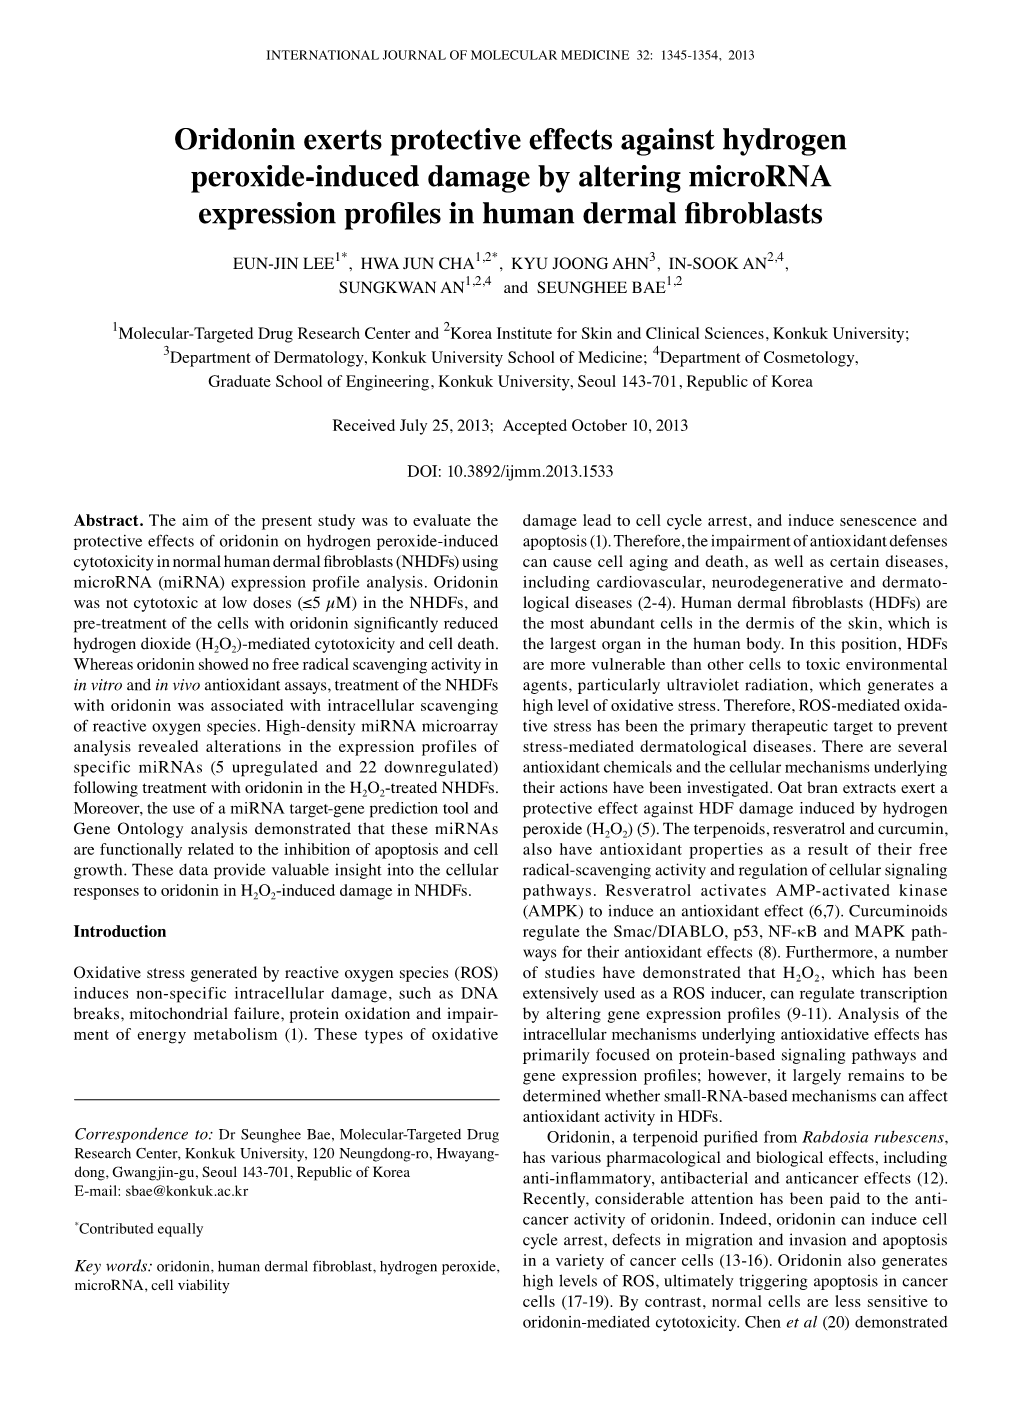 Oridonin Exerts Protective Effects Against Hydrogen Peroxide‑Induced Damage by Altering Microrna Expression Profiles in Human Dermal Fibroblasts